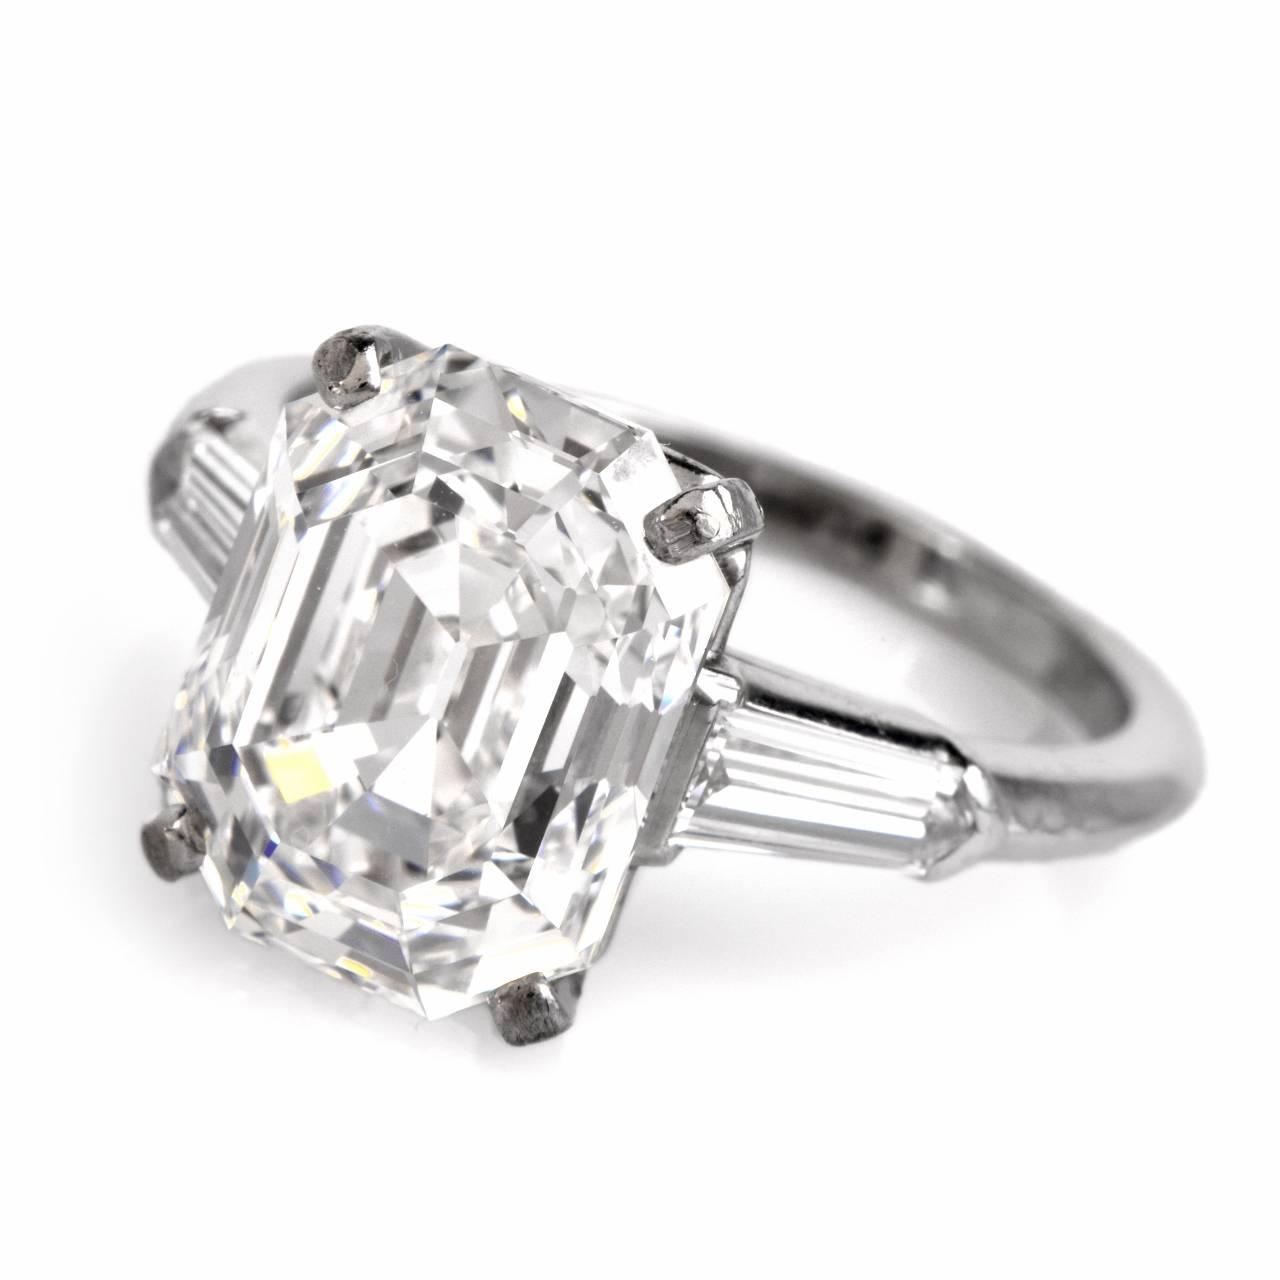 5.09ct F-IF Emerald-Cut Diamond Engagement Ring For Sale at 1stdibs